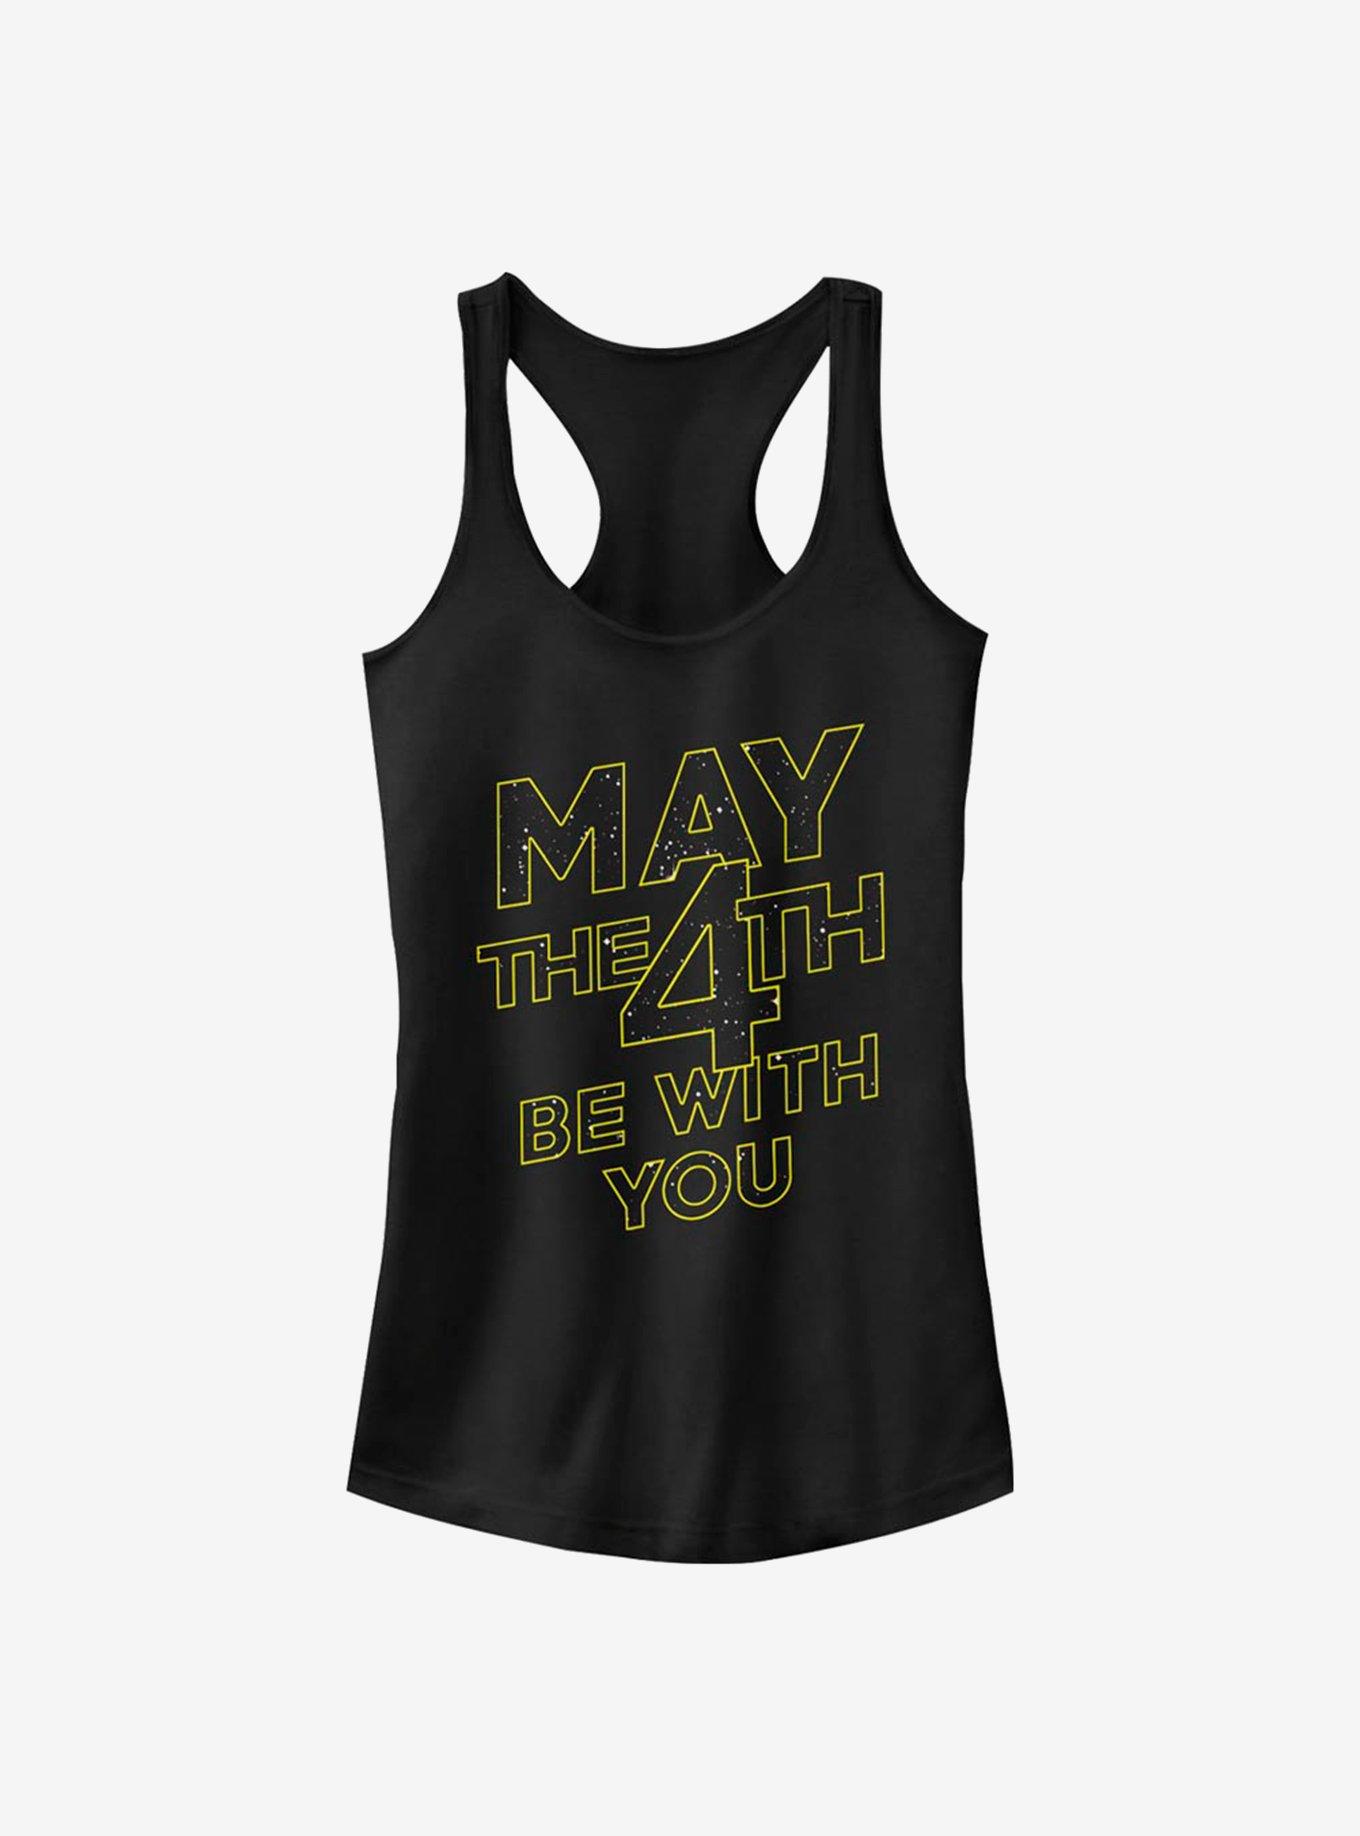 Star Wars May The 4th Be With You Logo Girls Tank